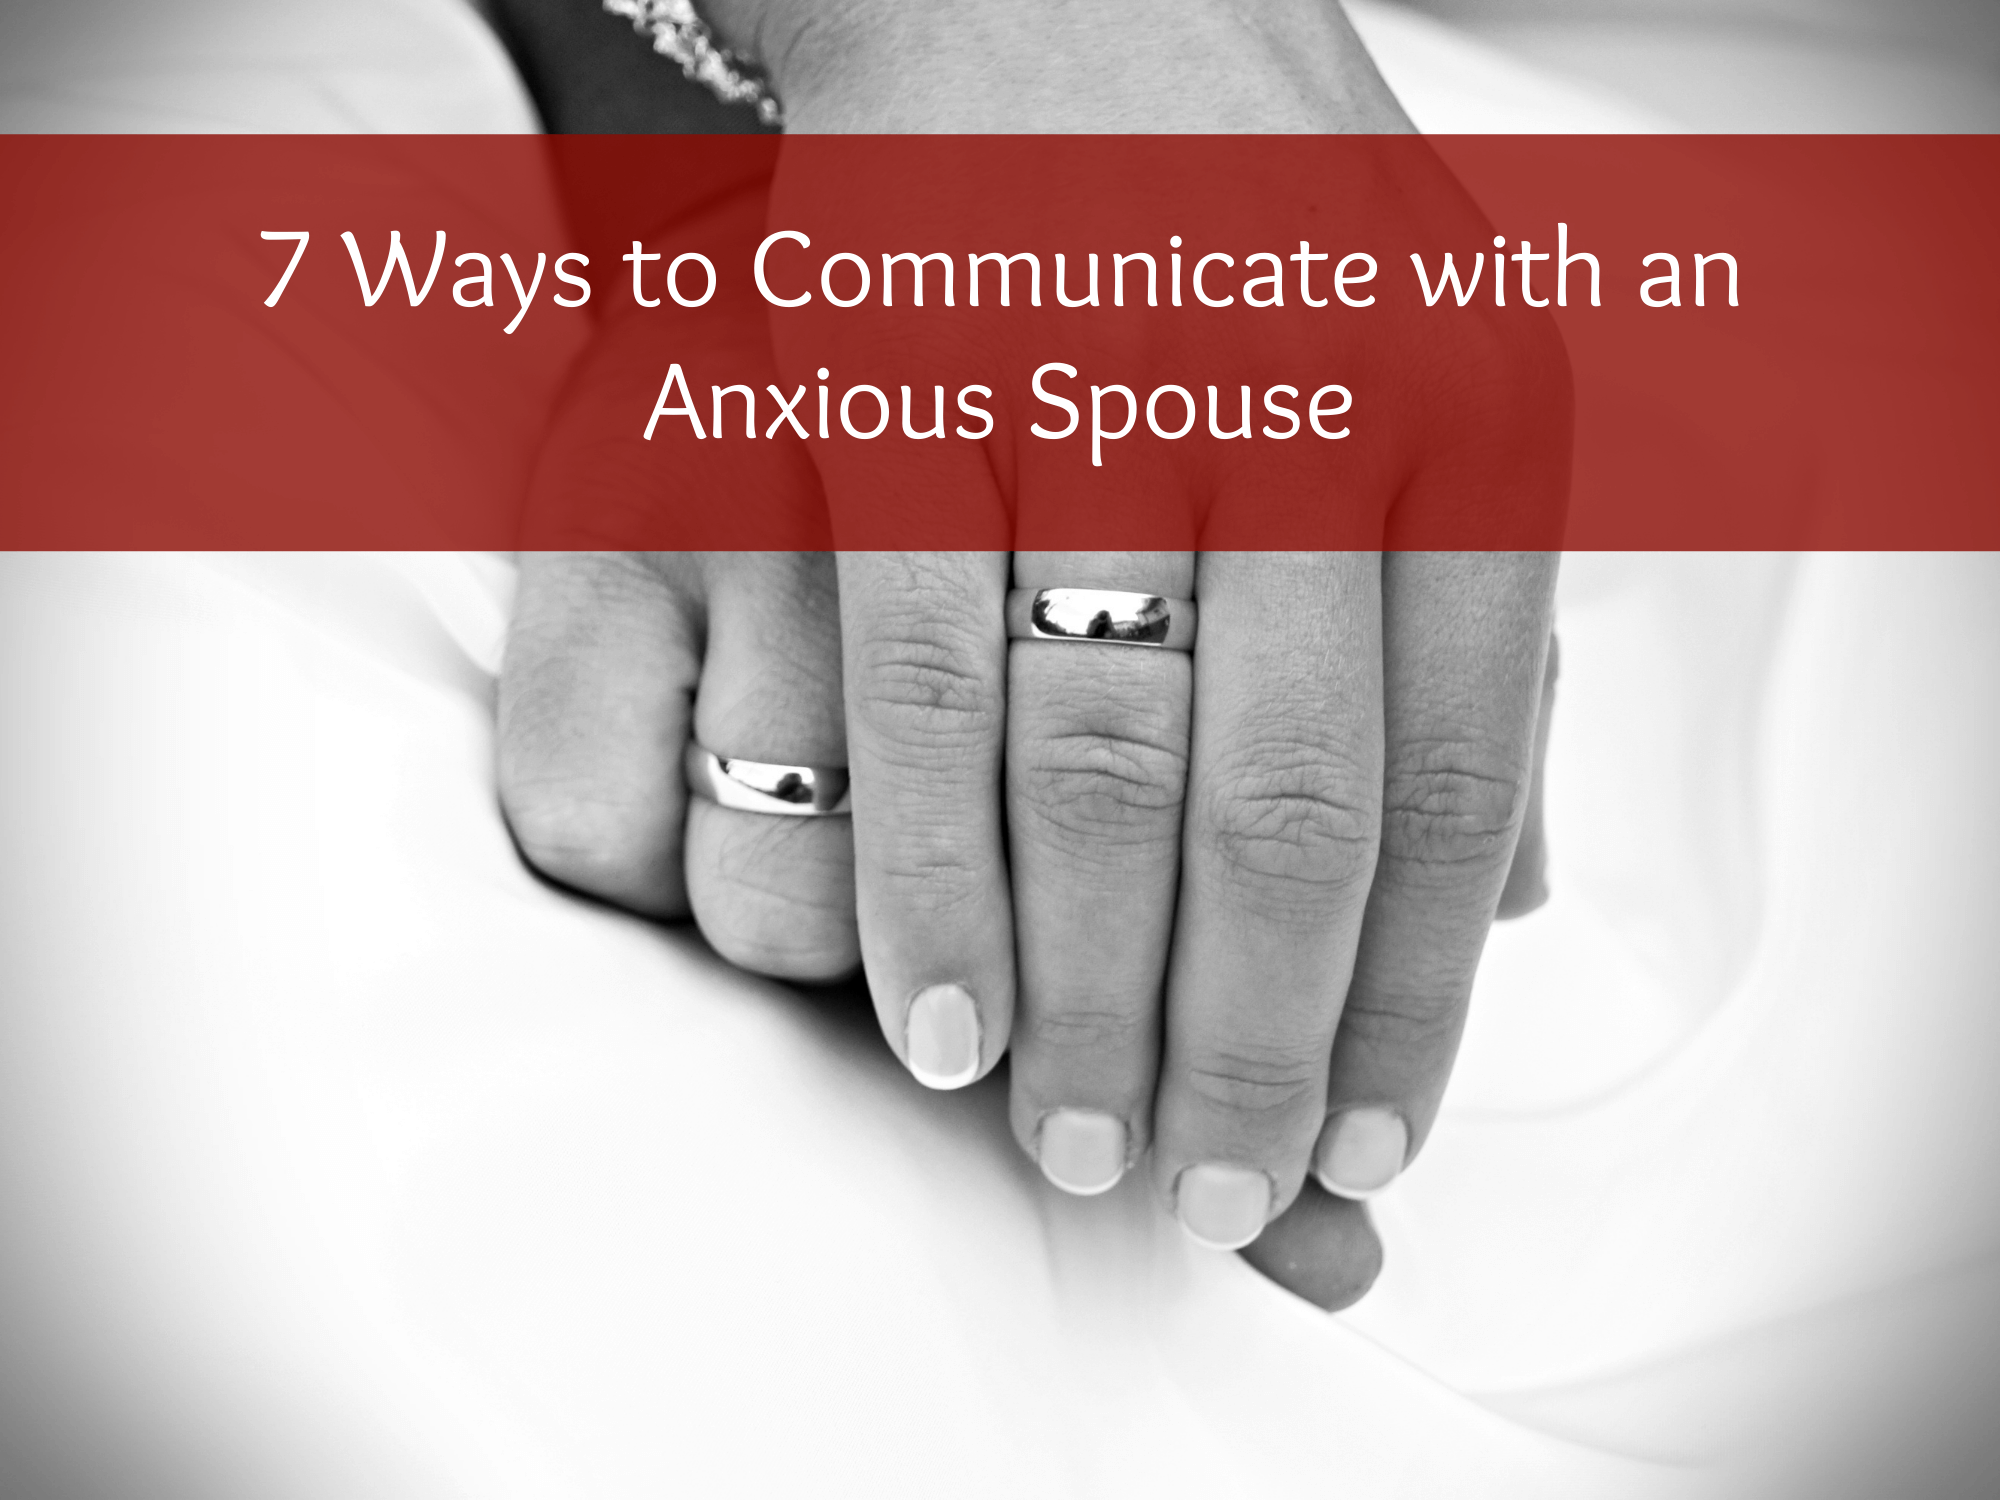 7 Ways to Communicate with an Anxious Spouse